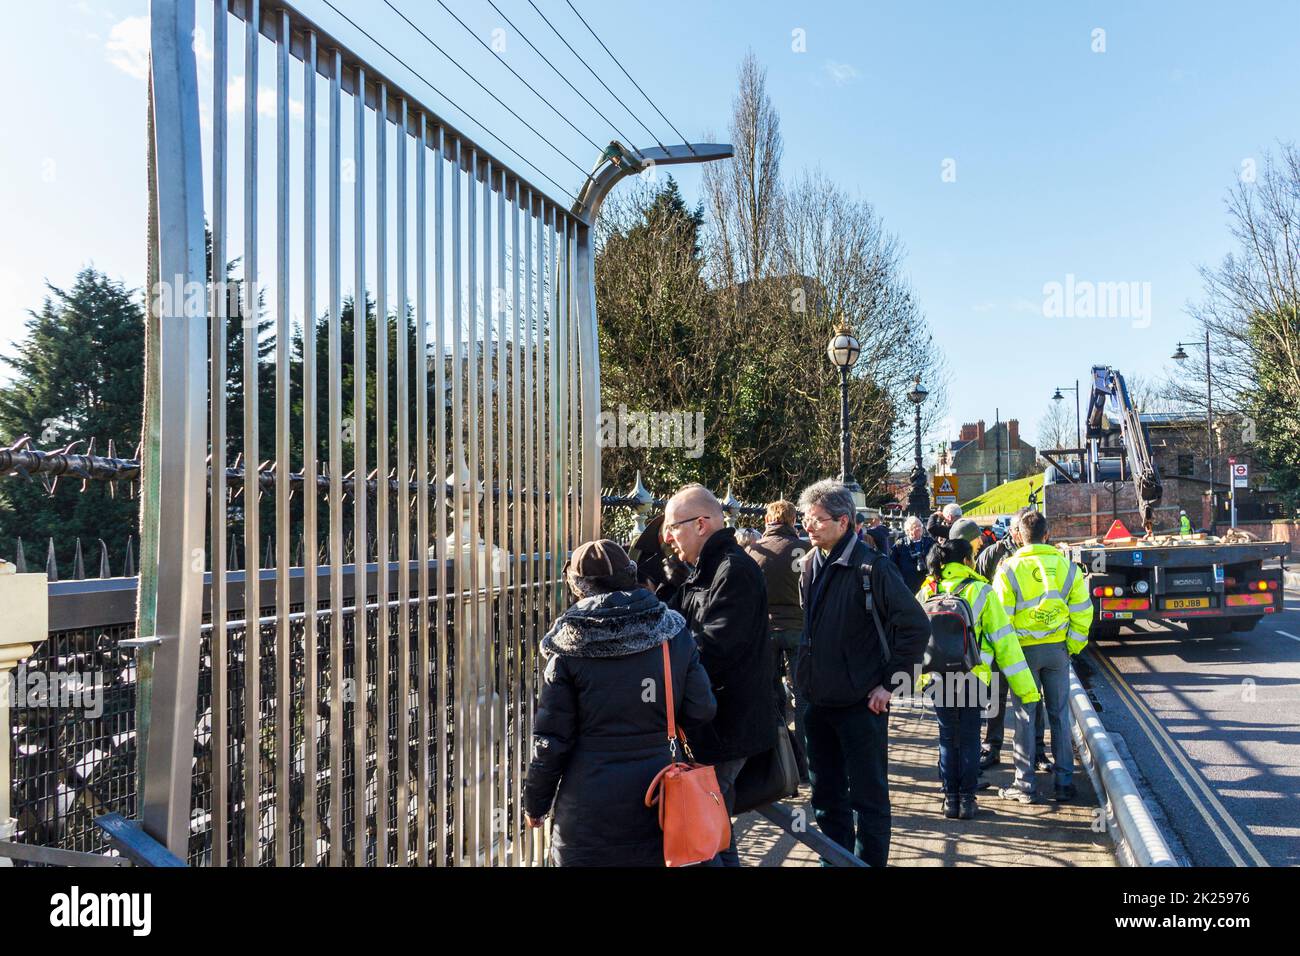 Local campaigners and council officers watch as a sample anti-suicide fence panel is installed on Hornsey Lane bridge in North London, UK Stock Photo